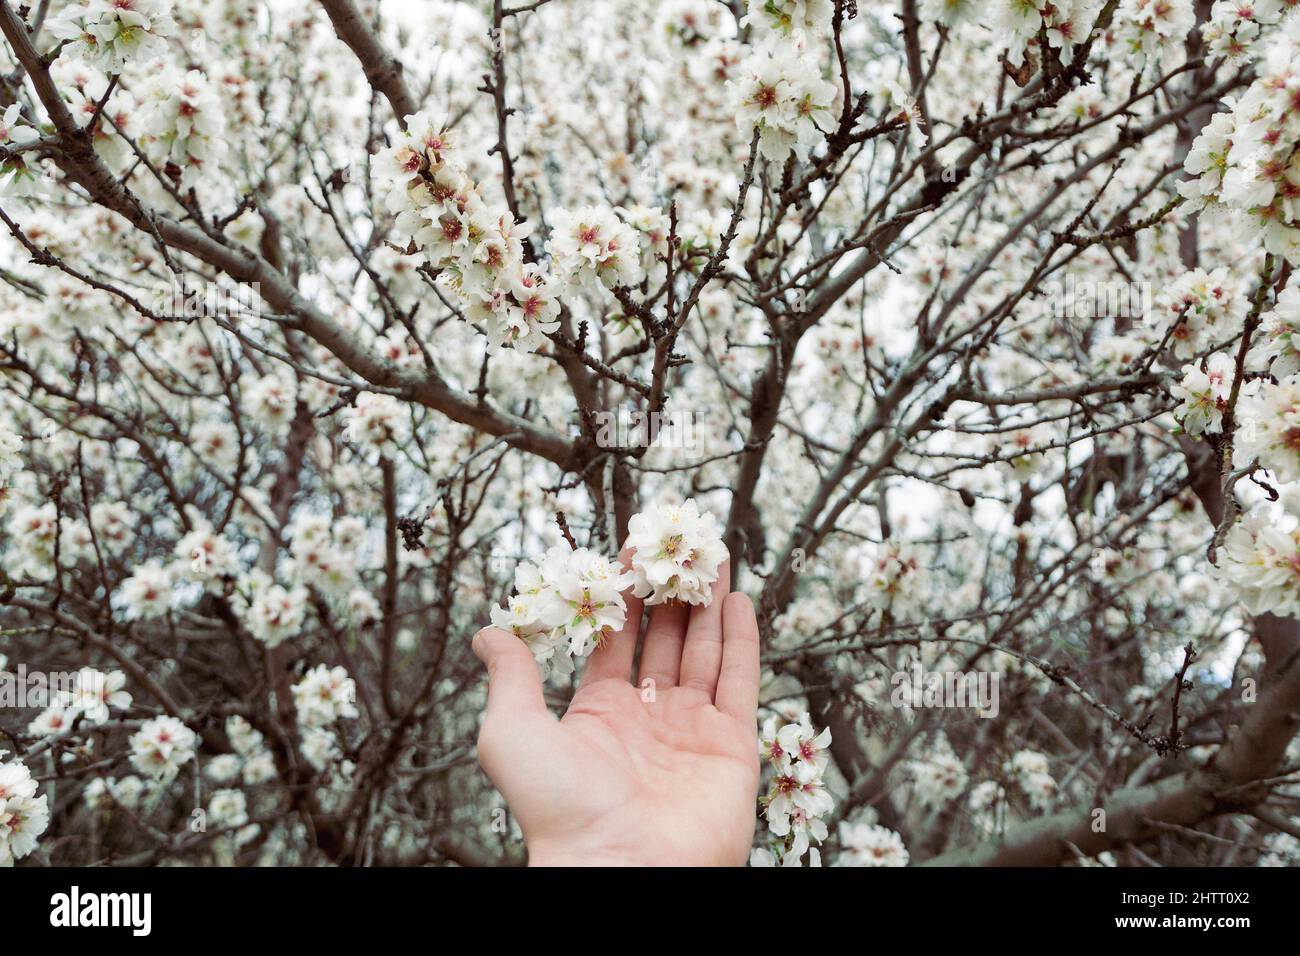 sensitive man's hand with flowers between fingers. Tender and delicate image with almond blossoms Stock Photo